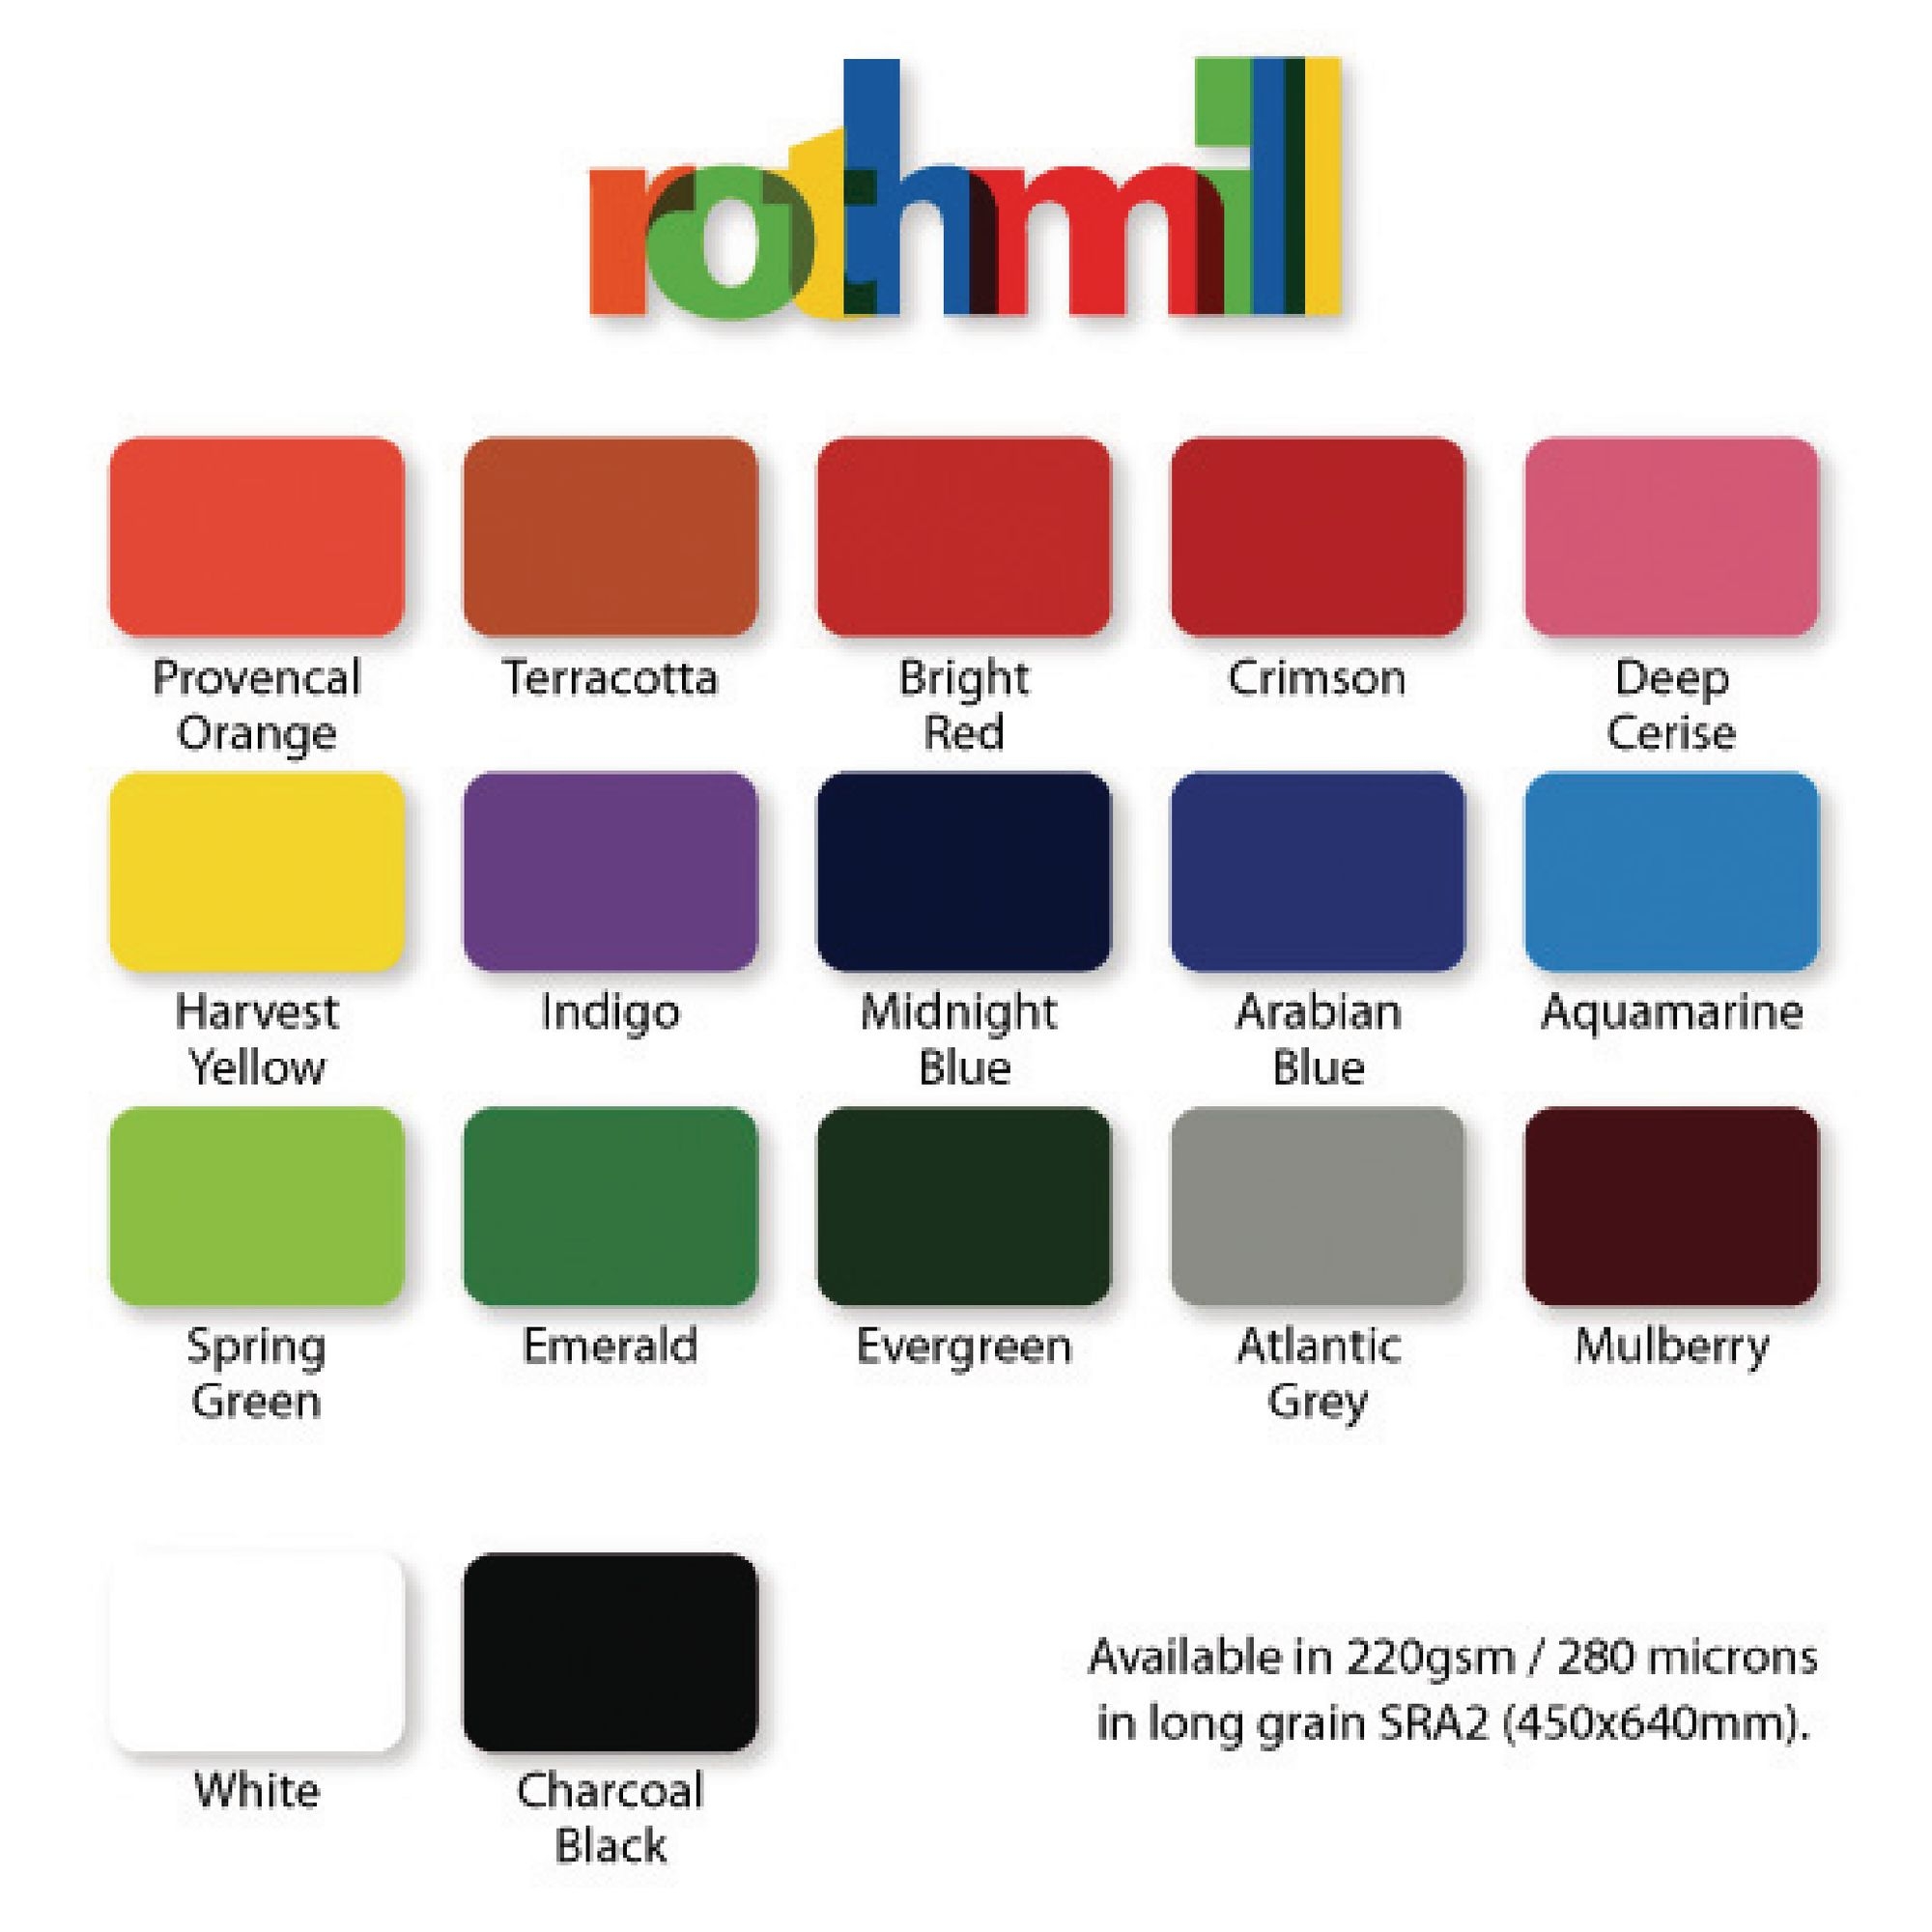 Rothmill A4 Brilliant Colour Card - Harvest yellow